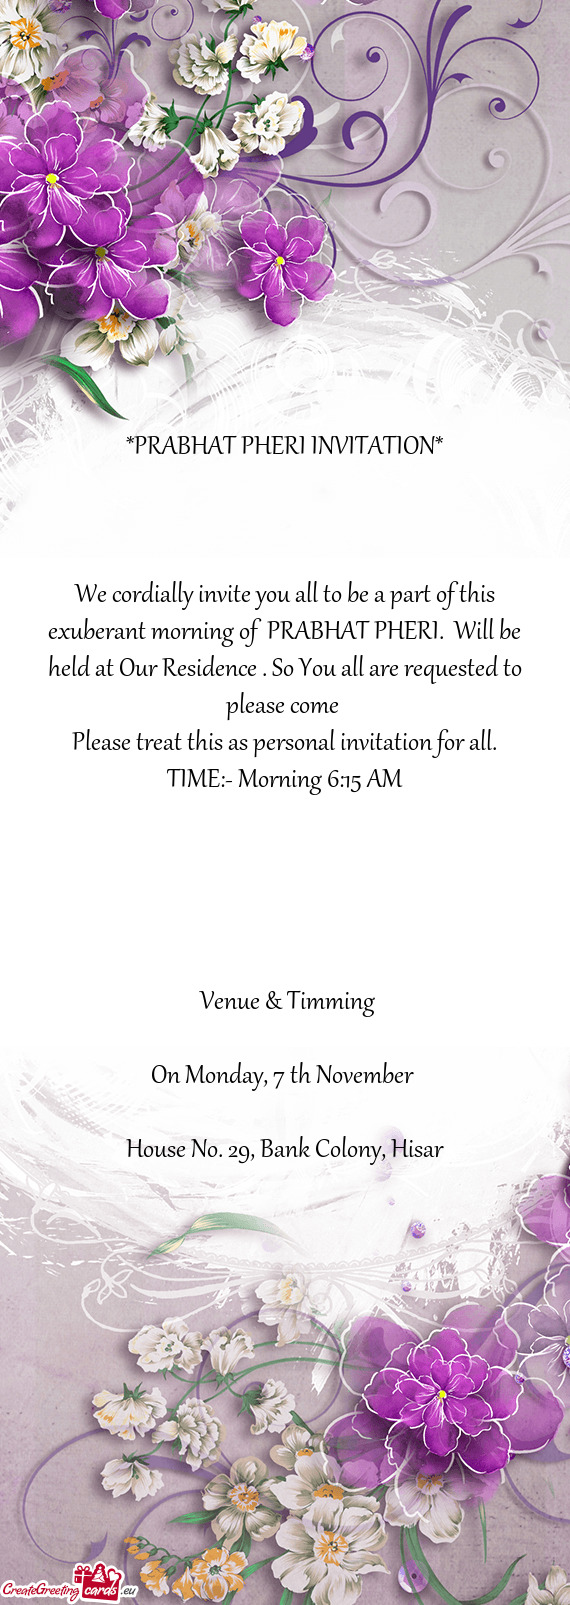 We cordially invite you all to be a part of this exuberant morning of PRABHAT PHERI. Will be held